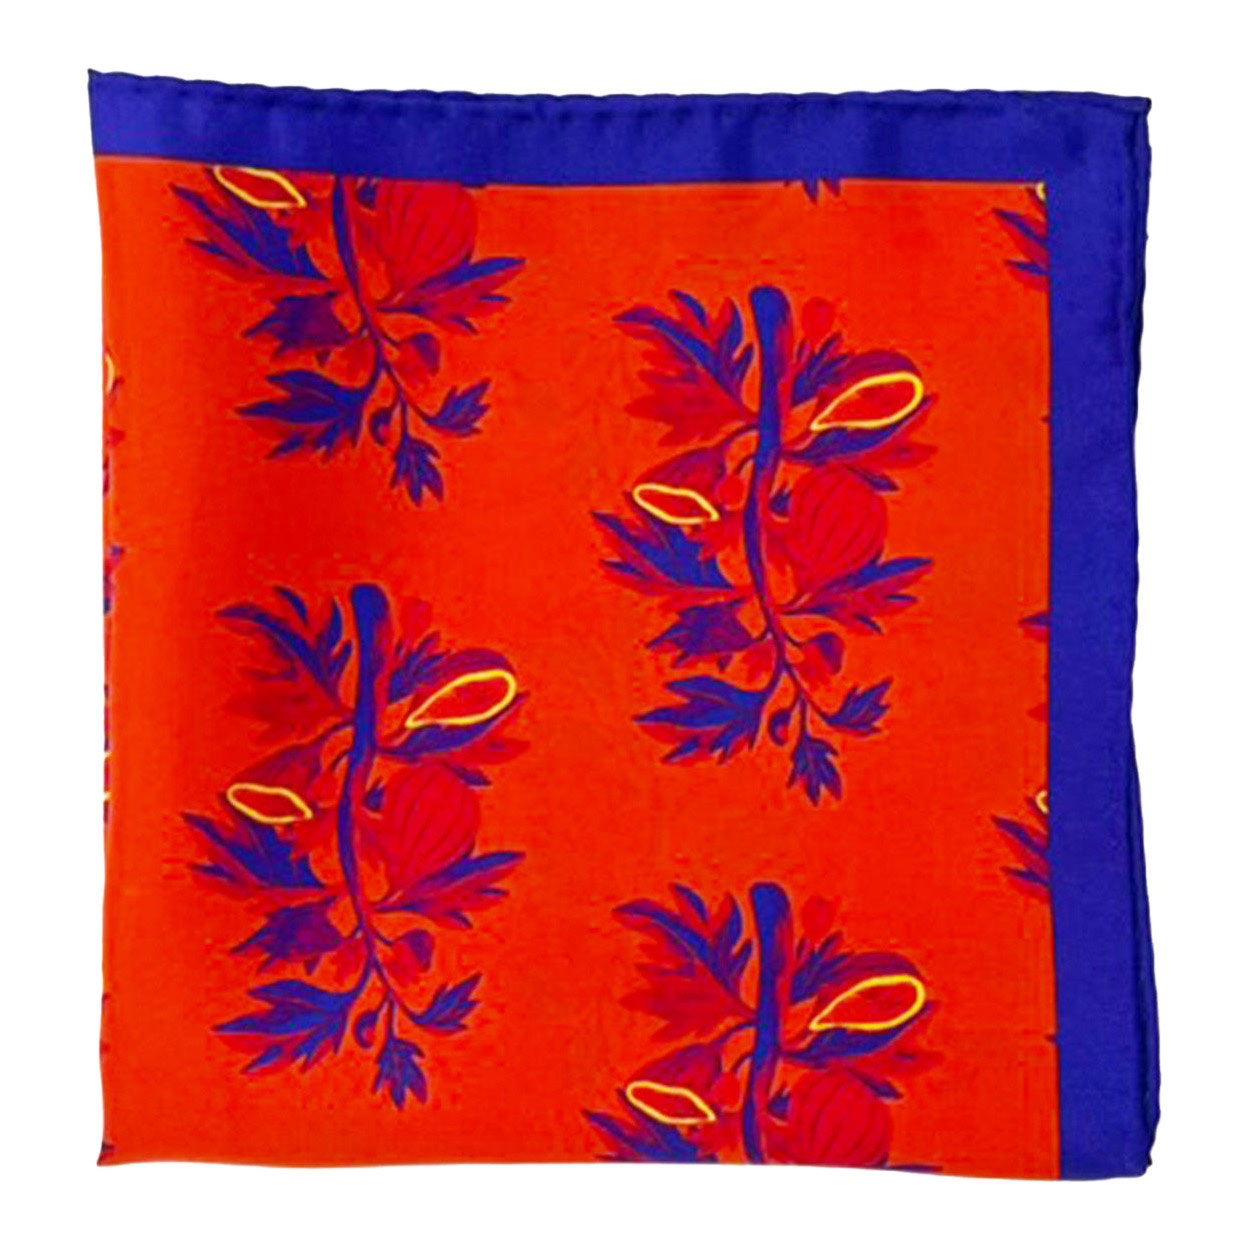 The 'Severn' silk pocket square from SOHO Scarves folded into a quarter, showing the repeat motif in purple and red.